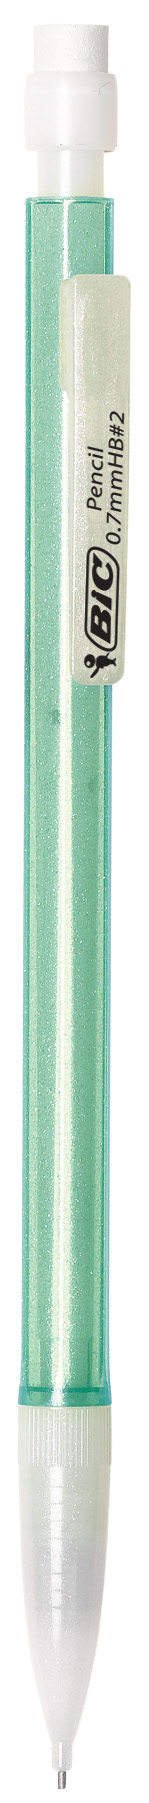 BIC Xtra-Sparkle No. 2 Mechanical Pencils with Erasers, Medium Point (0.7mm), 24 Pencils - image 4 of 7